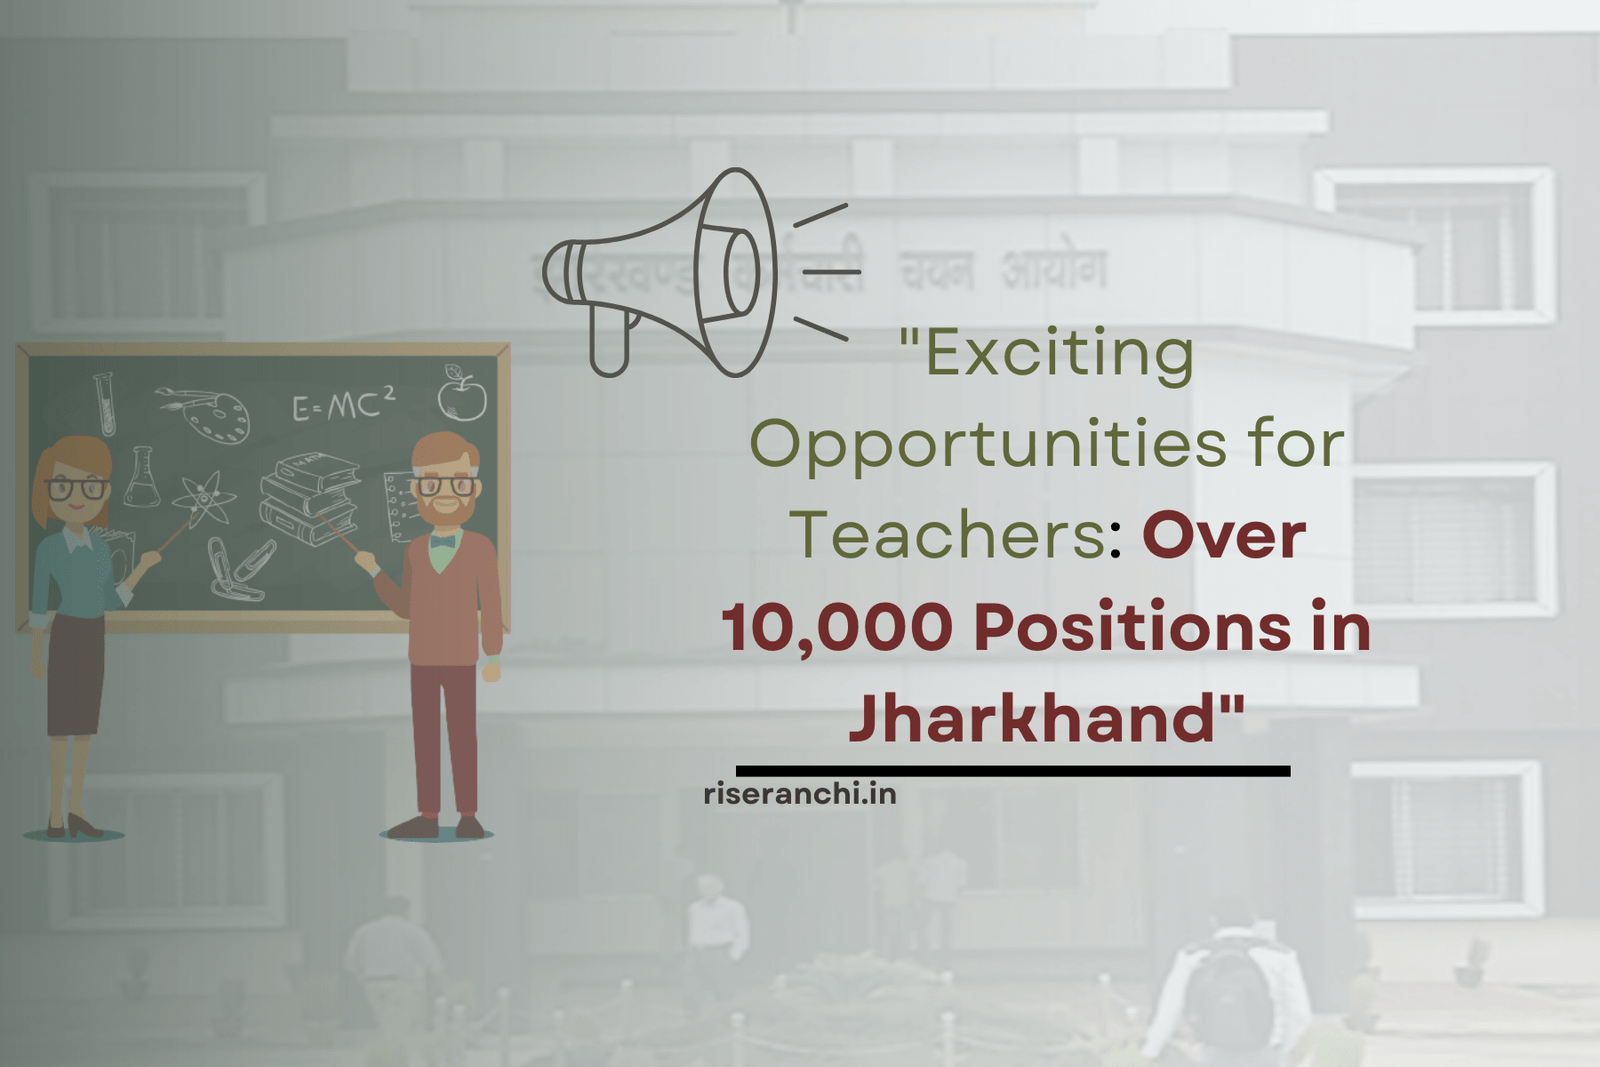 Exciting Opportunities for Teachers: Over 10,000 Positions to be Filled in Jharkhand